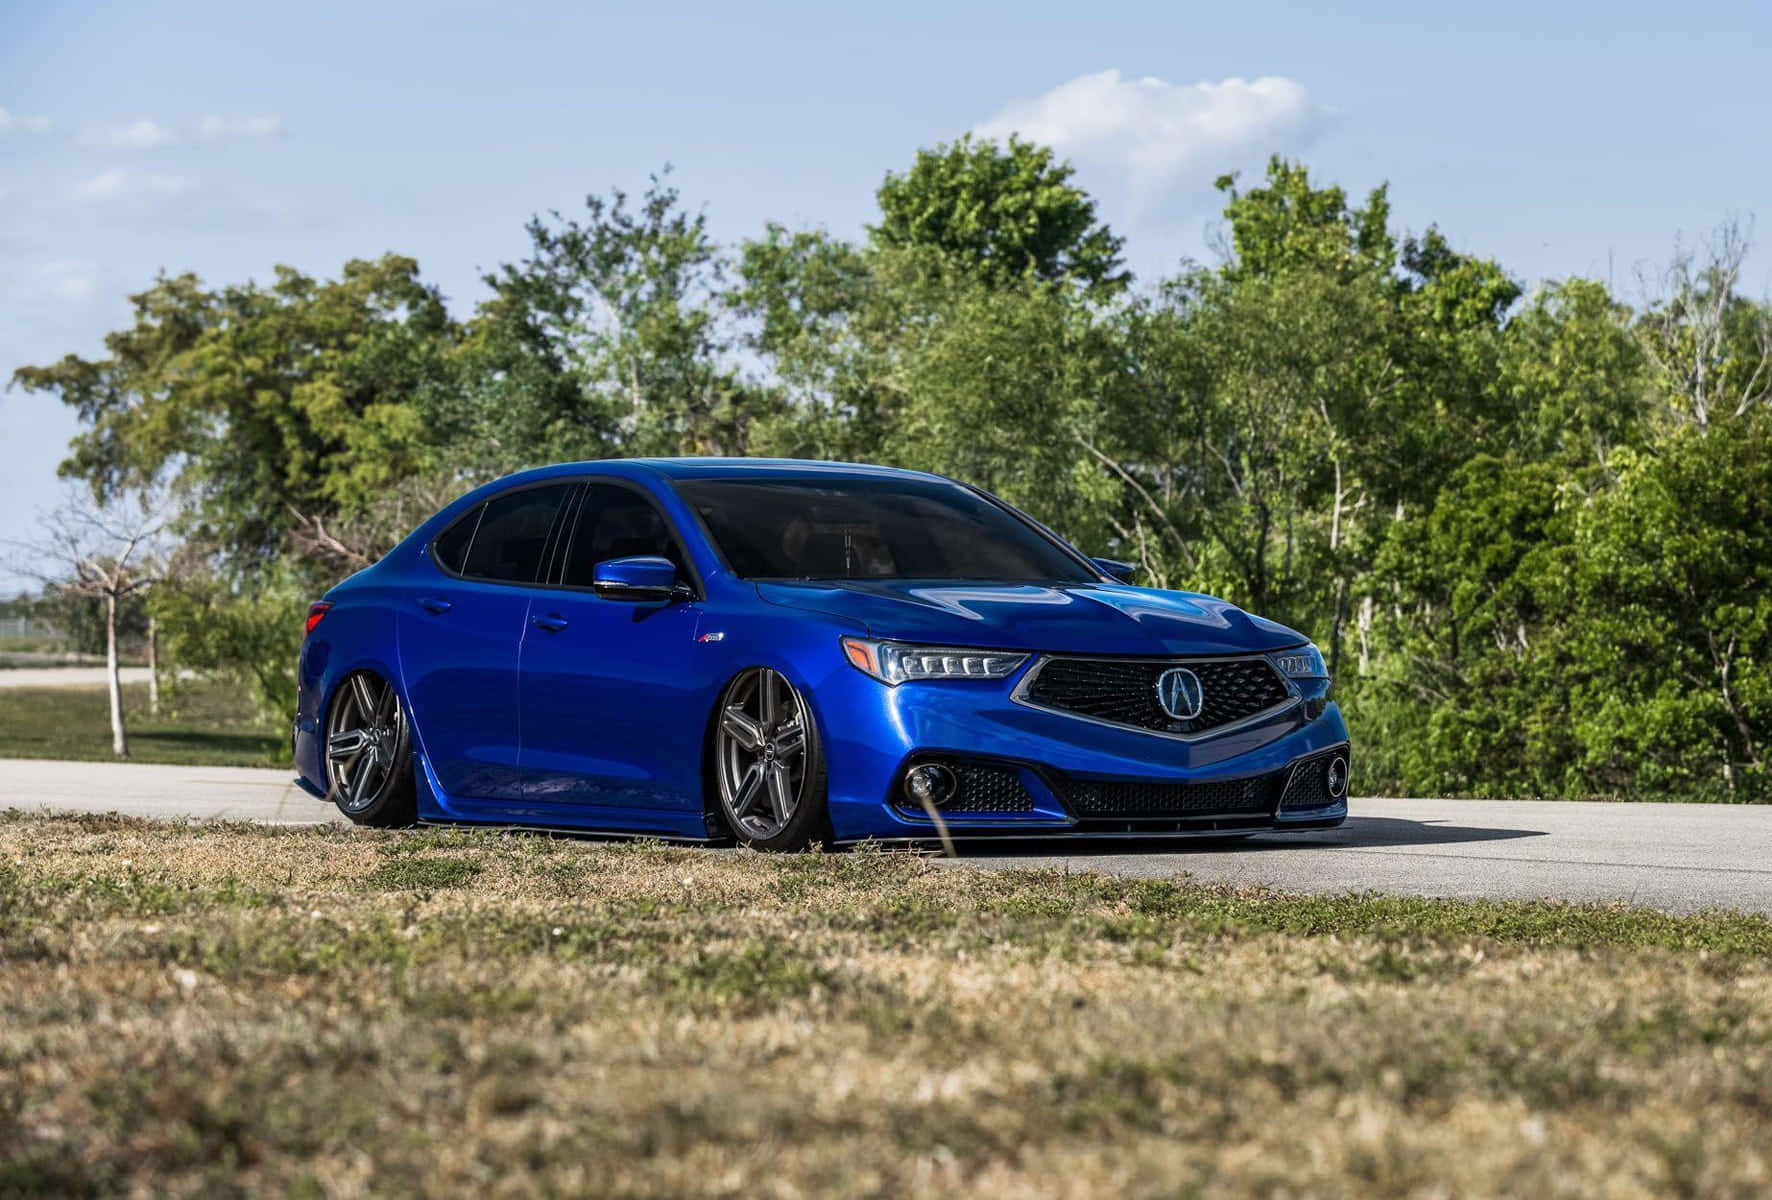 Sleek and Sophisticated - Acura TLX in Motion Wallpaper